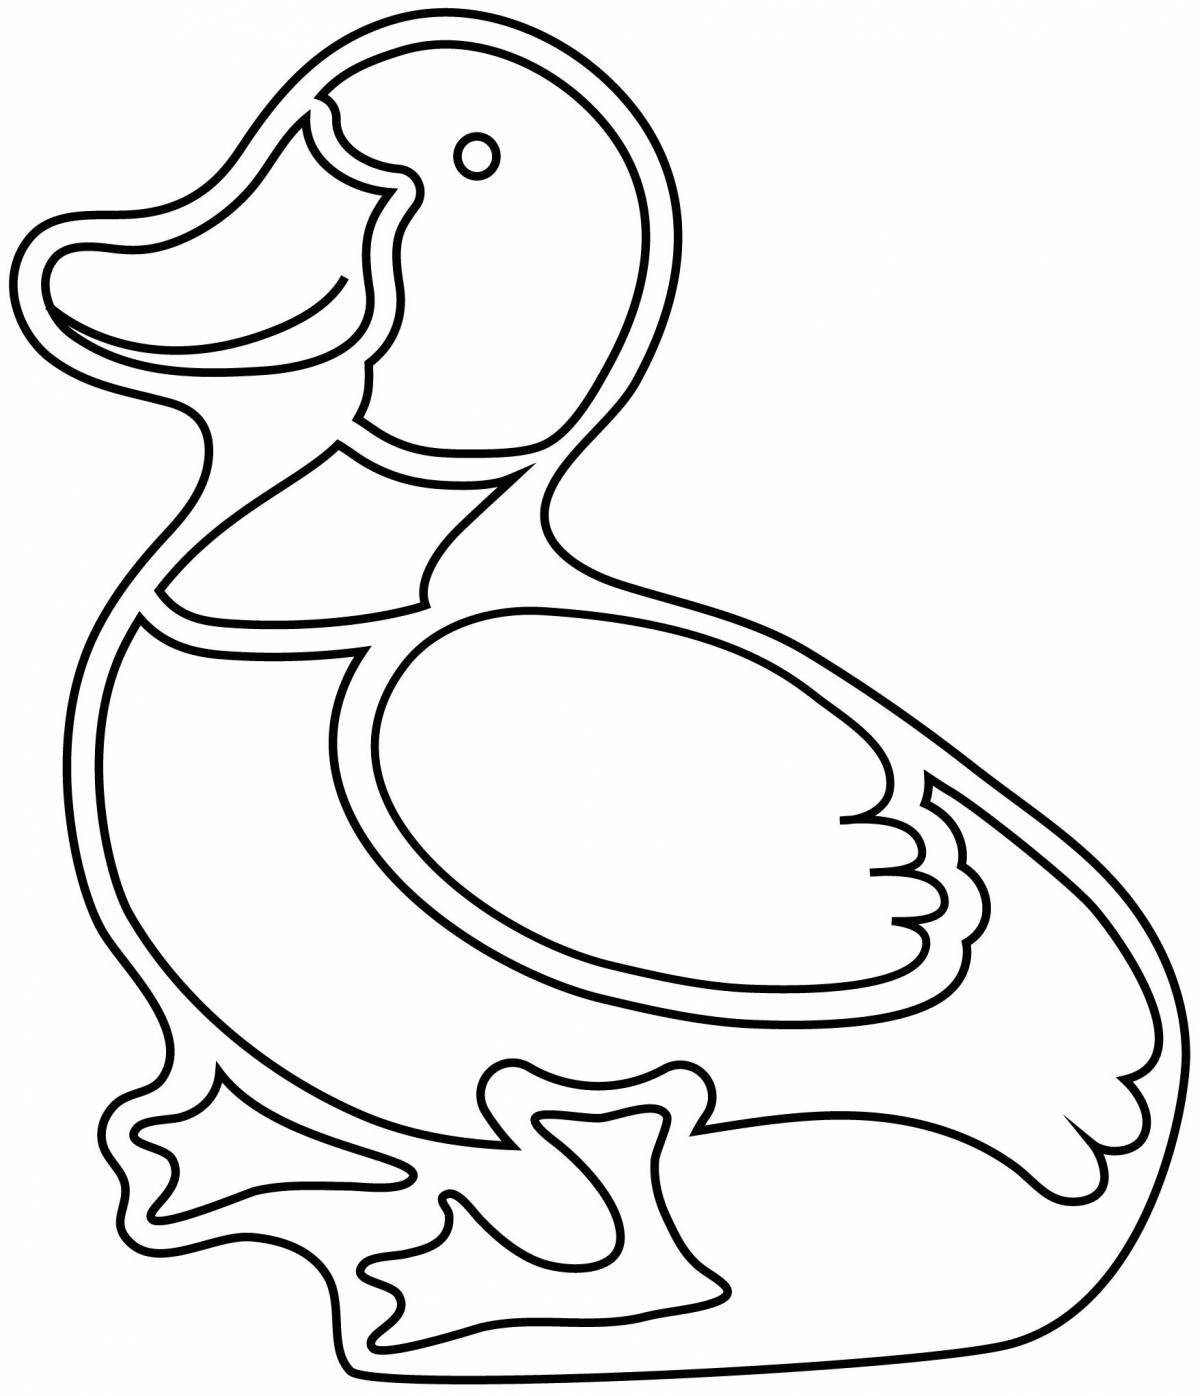 Lalanfan playful duck coloring page